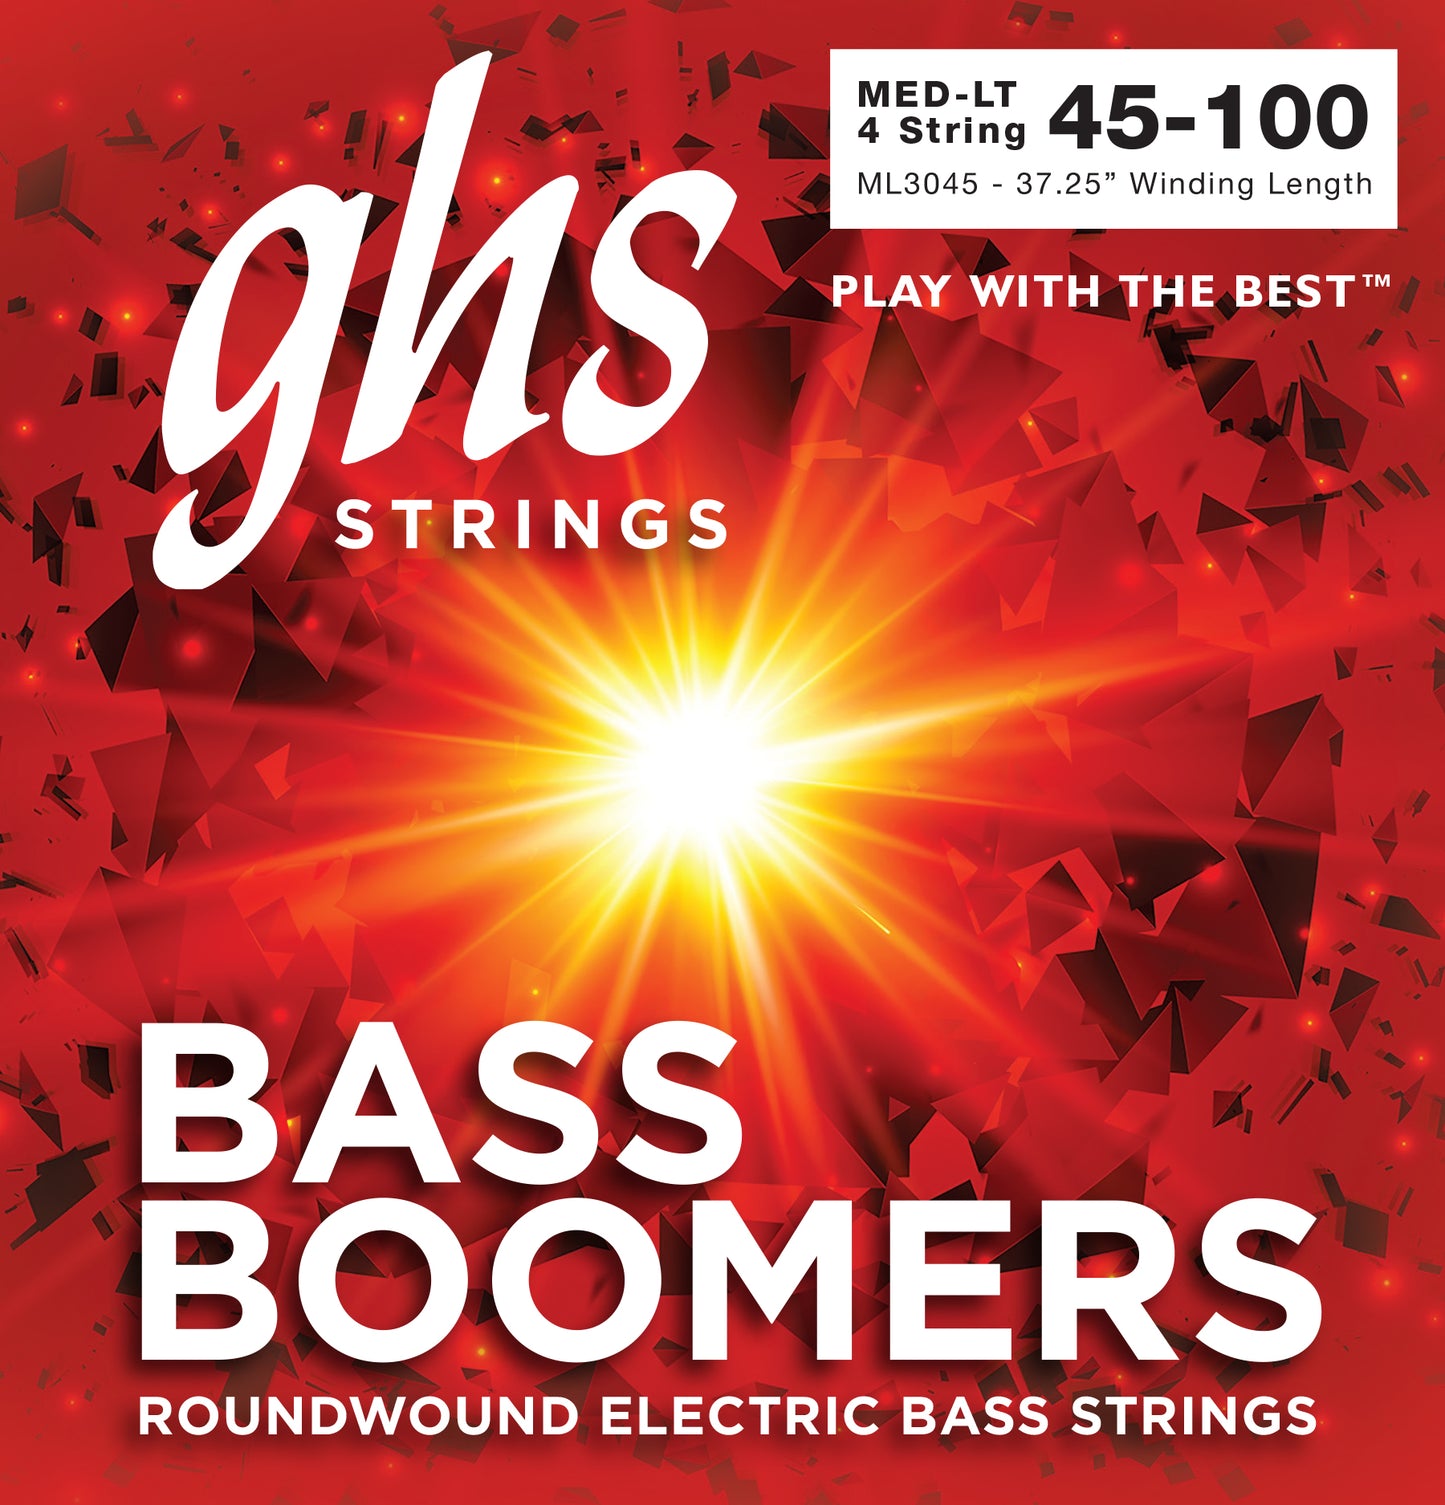 GHS Bass Boomers ML3045, 4-String 45-100